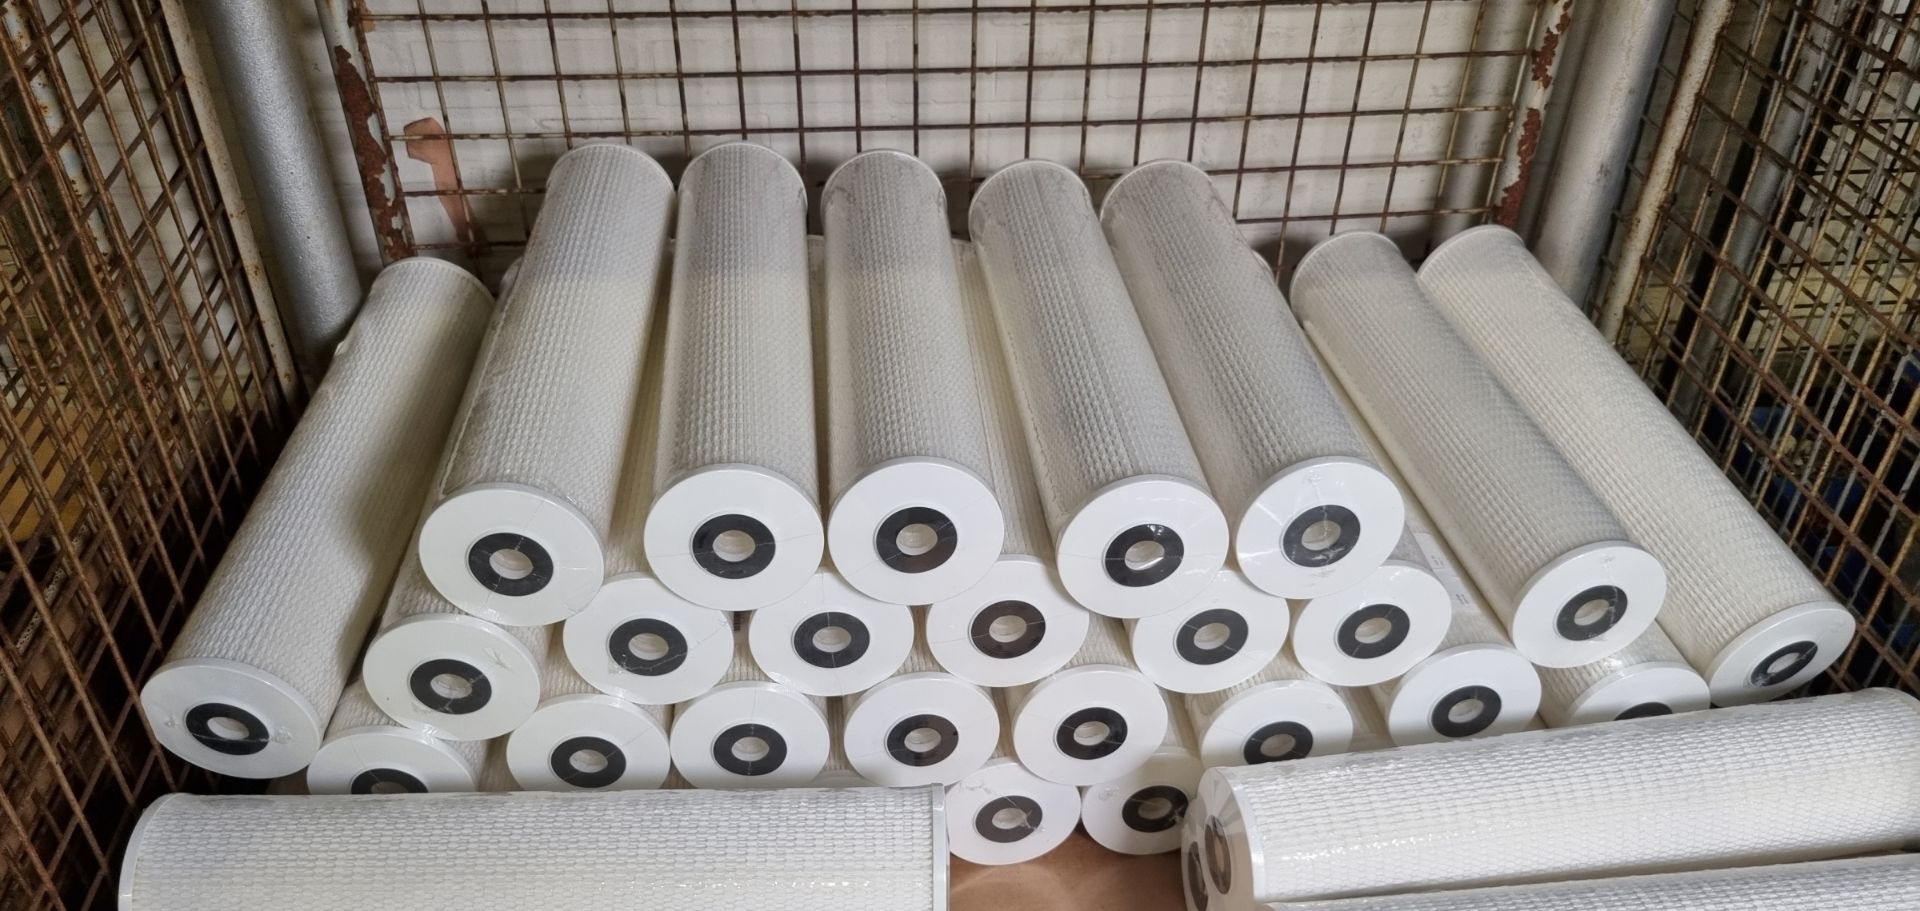 45x Cylinder paper filter cartridges - length: 500mm, OD: 115mm, ID: 28mm - Image 4 of 5